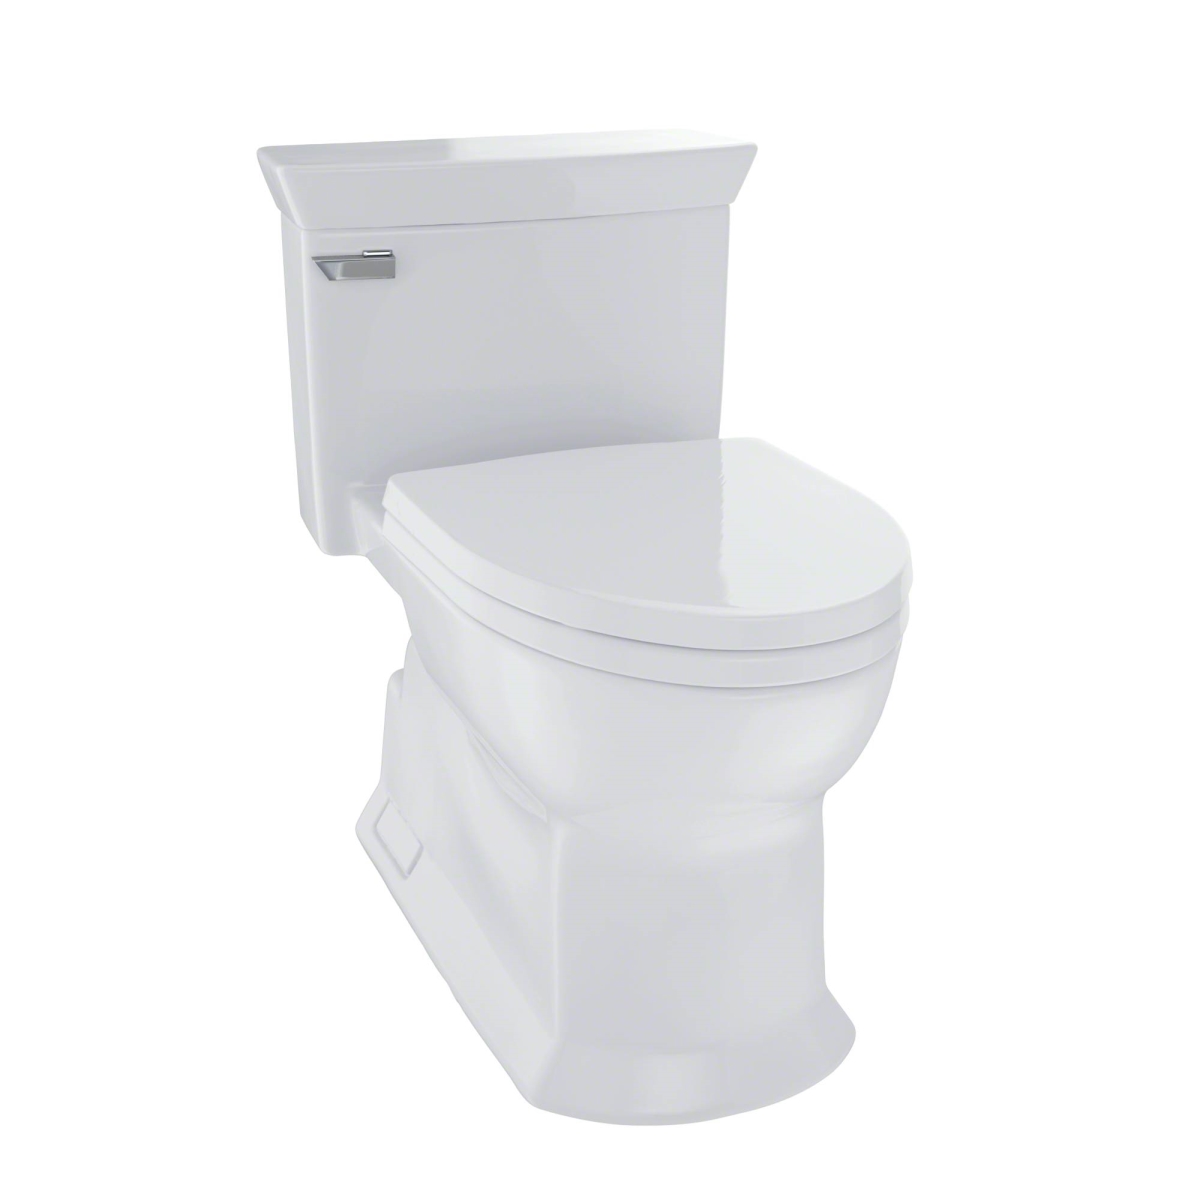 Ms964214cefg-11 Eco Soiree Elongated 1.28 Gpf Universal Height Skirted Toilet With Cefiontect, Colonial White